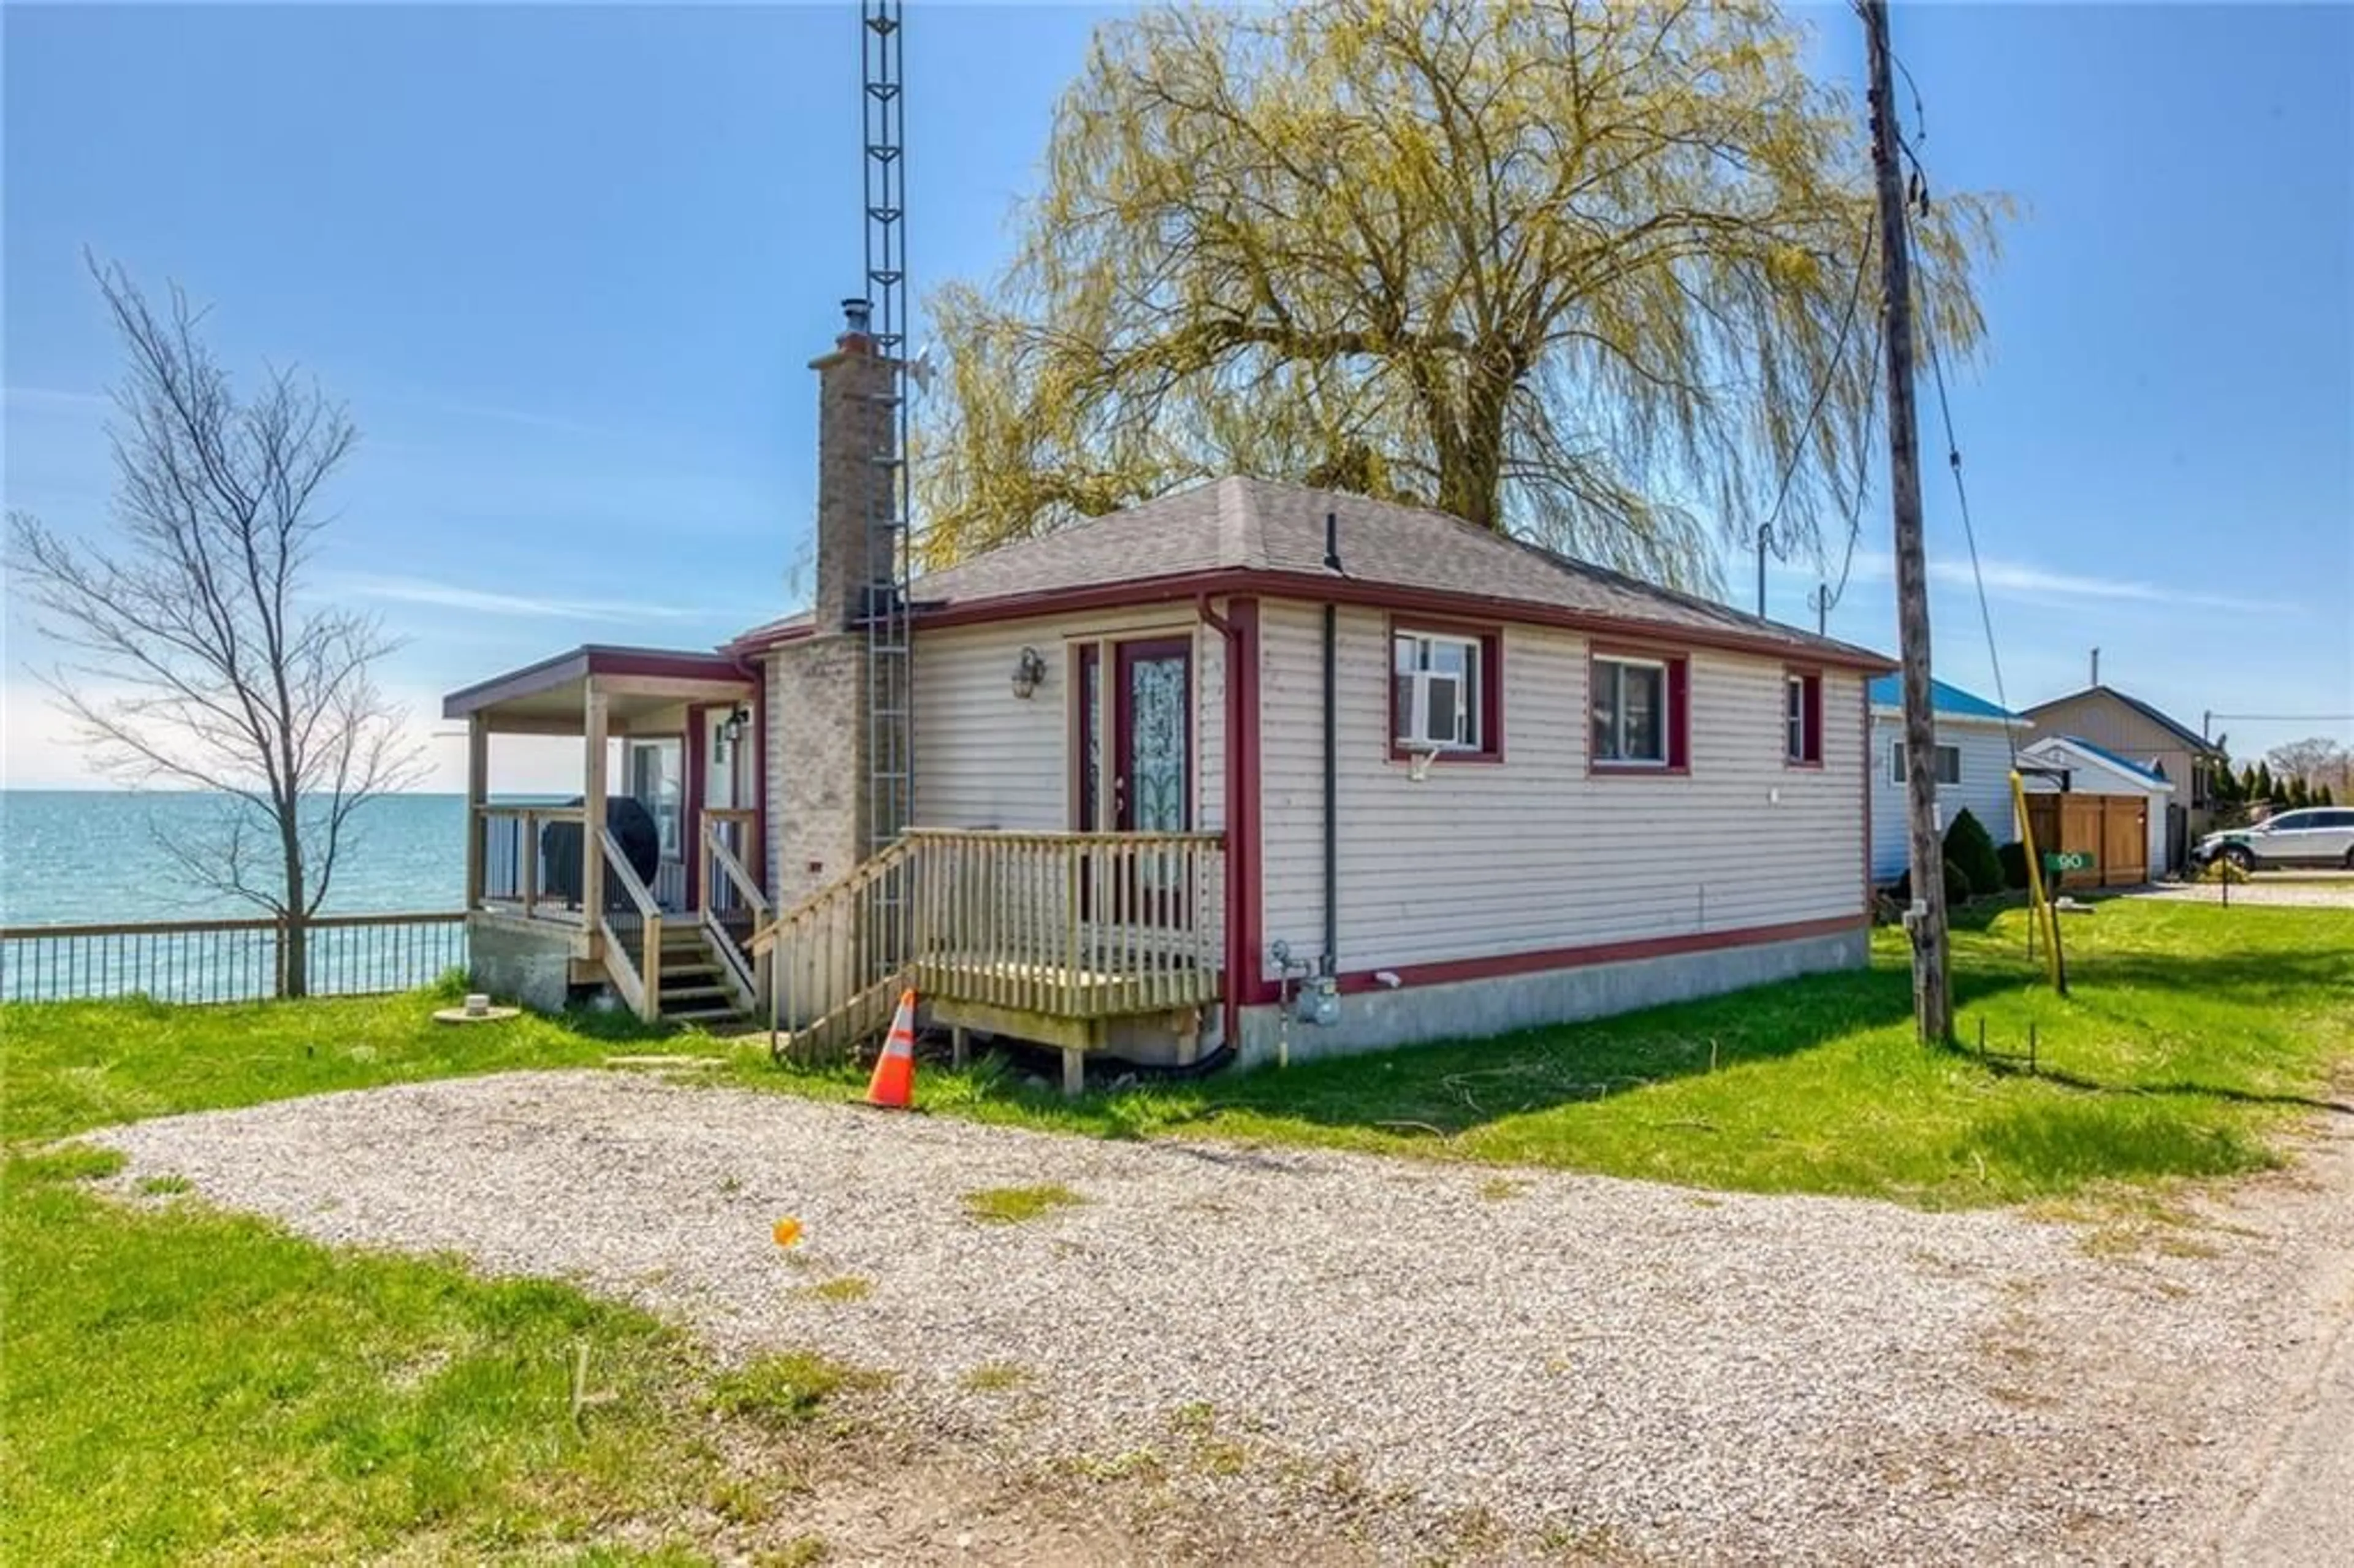 Cottage for 90 Lakeshore Rd, Selkirk Ontario N0A 1P0